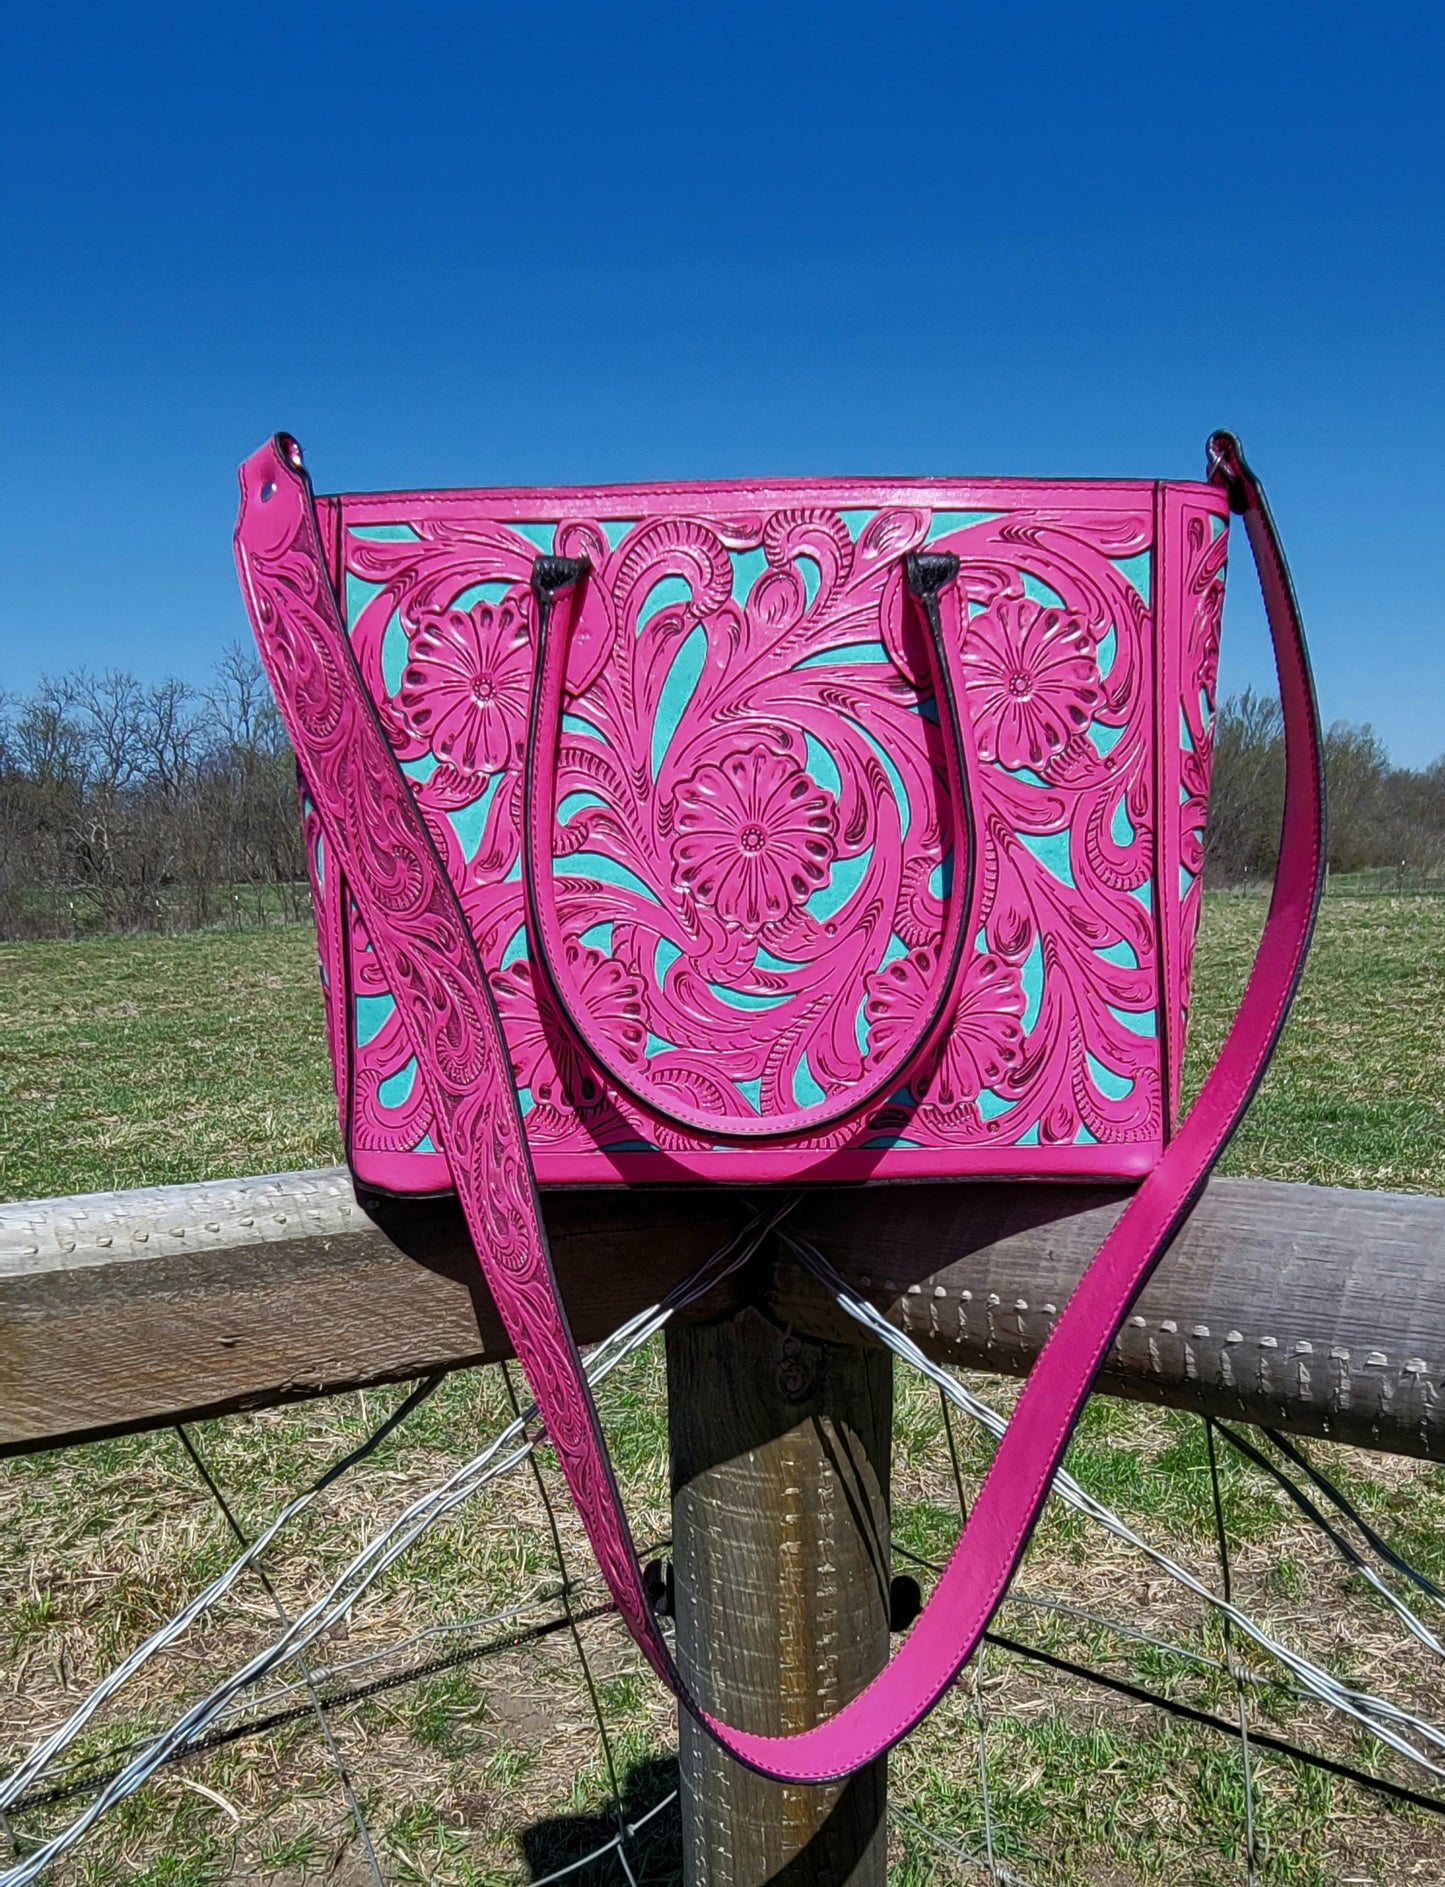 Tooled Leather Tote in Neon Pink & Turquoise